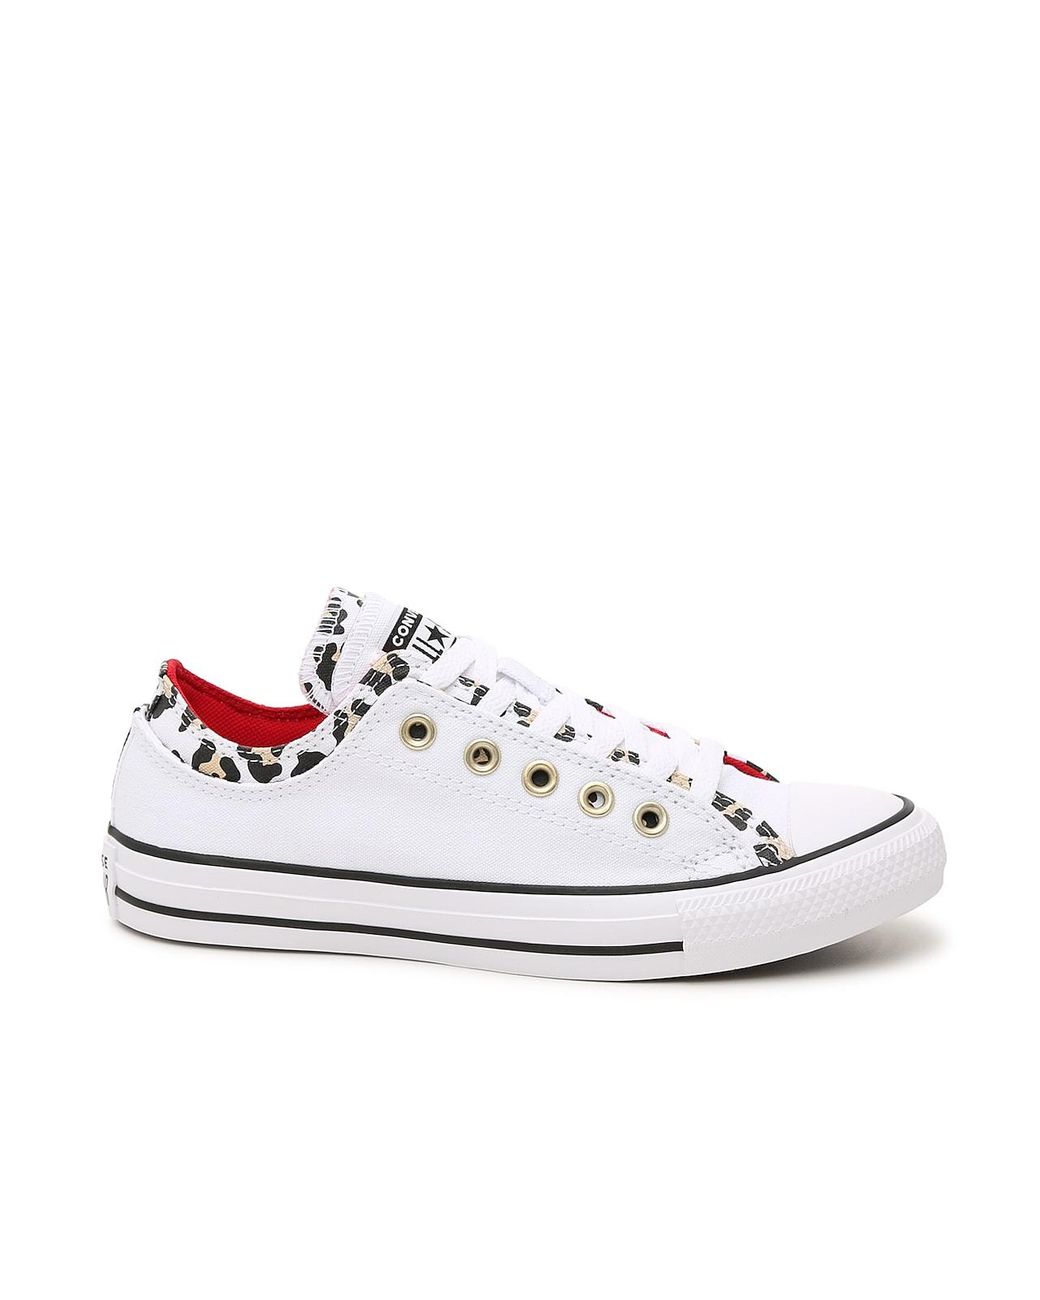 Converse Chuck Taylor All Star Double Tongue Sneaker in White | Lyst